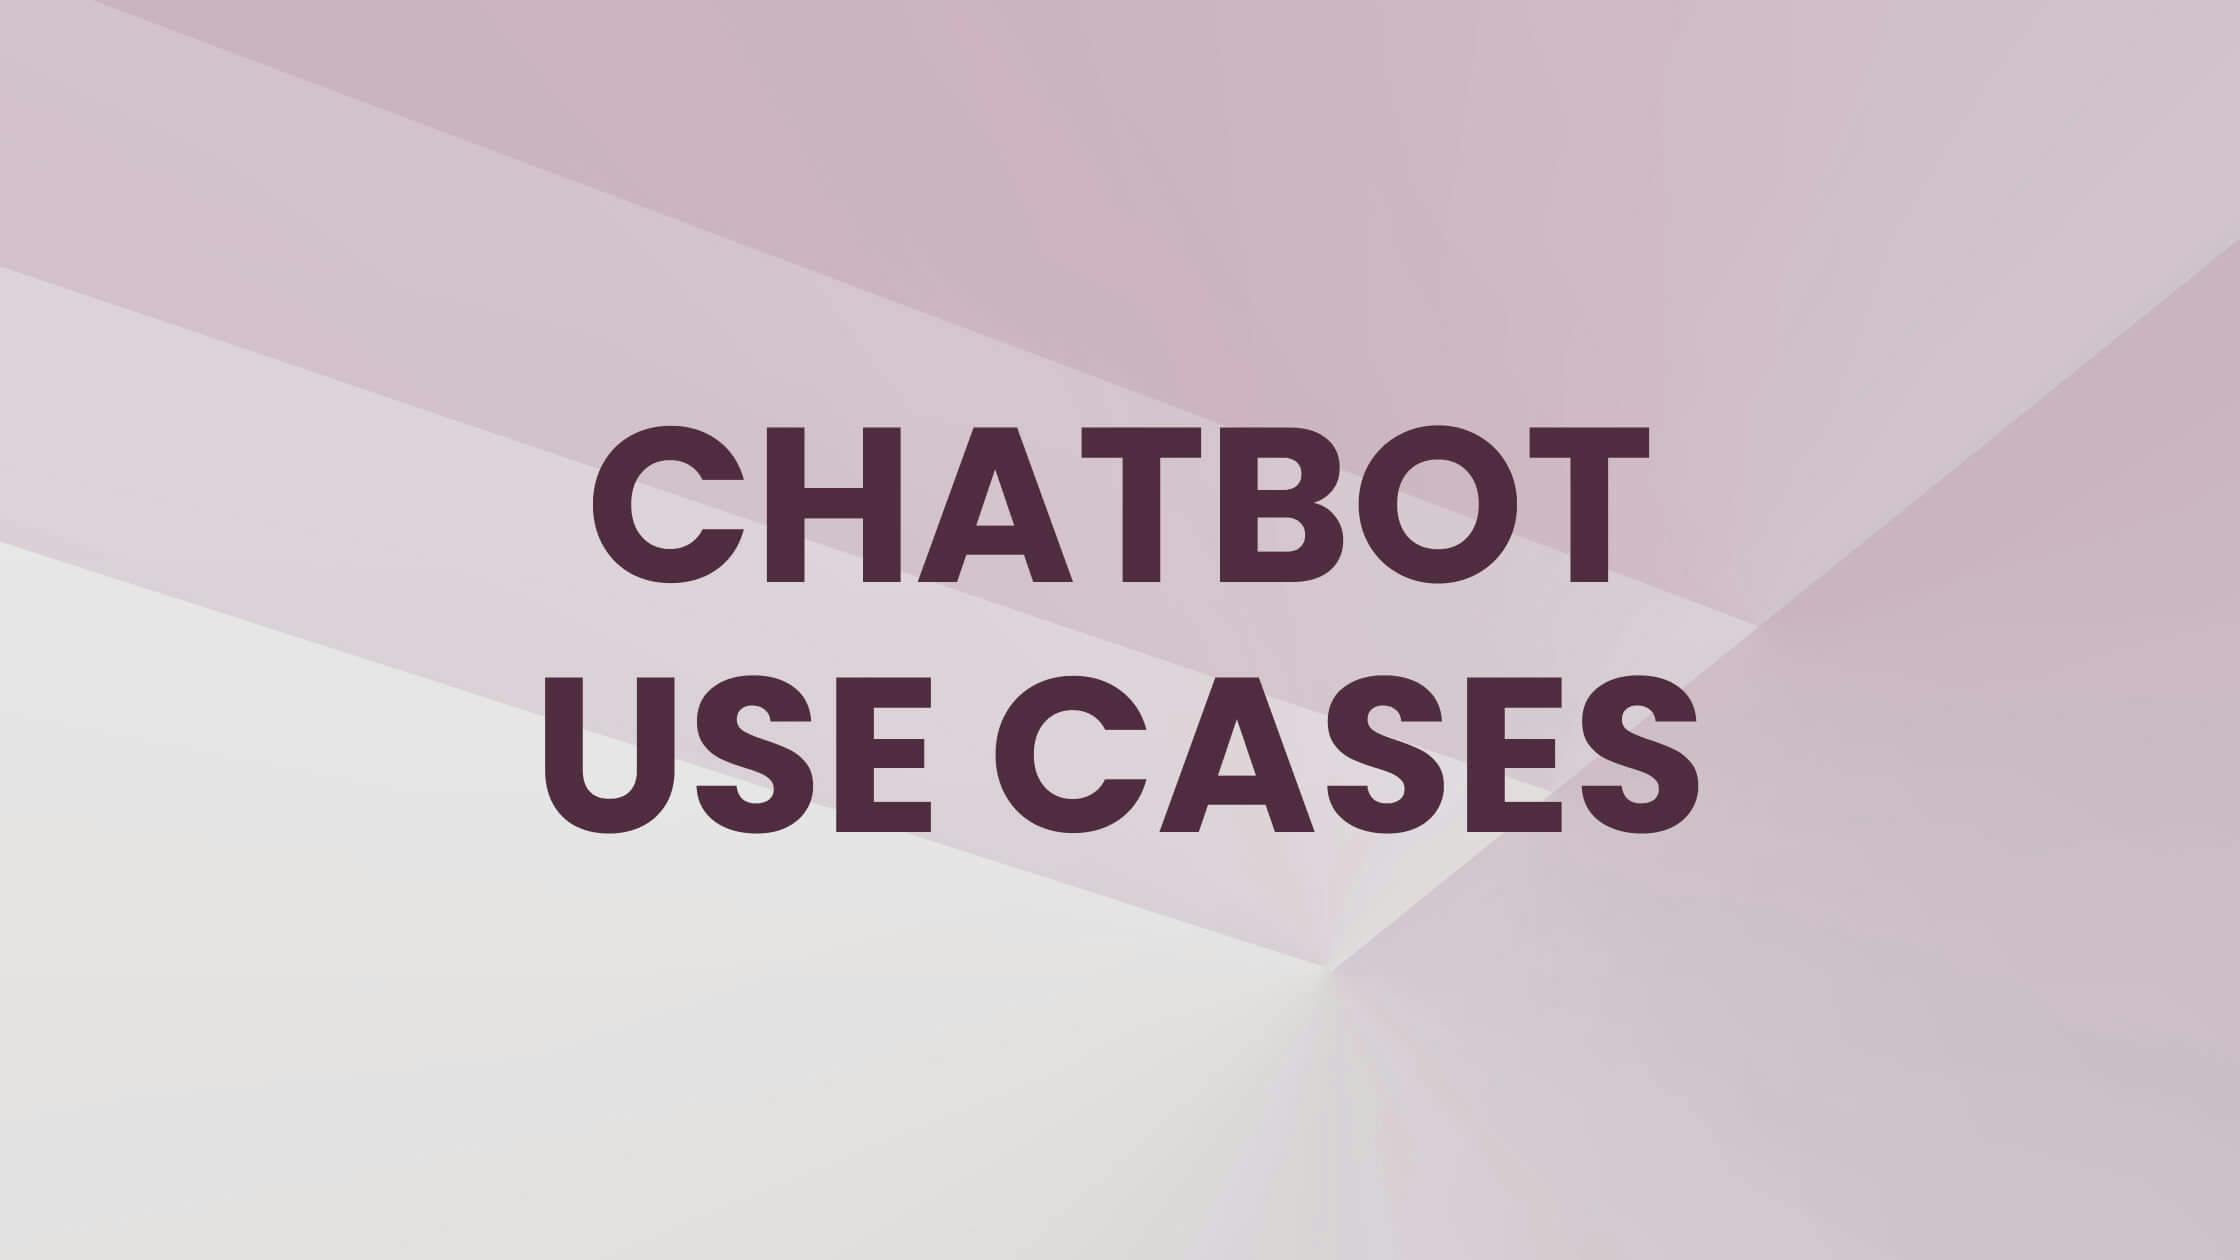 We Explore 10 Chatbot Use Cases Across Various Industries